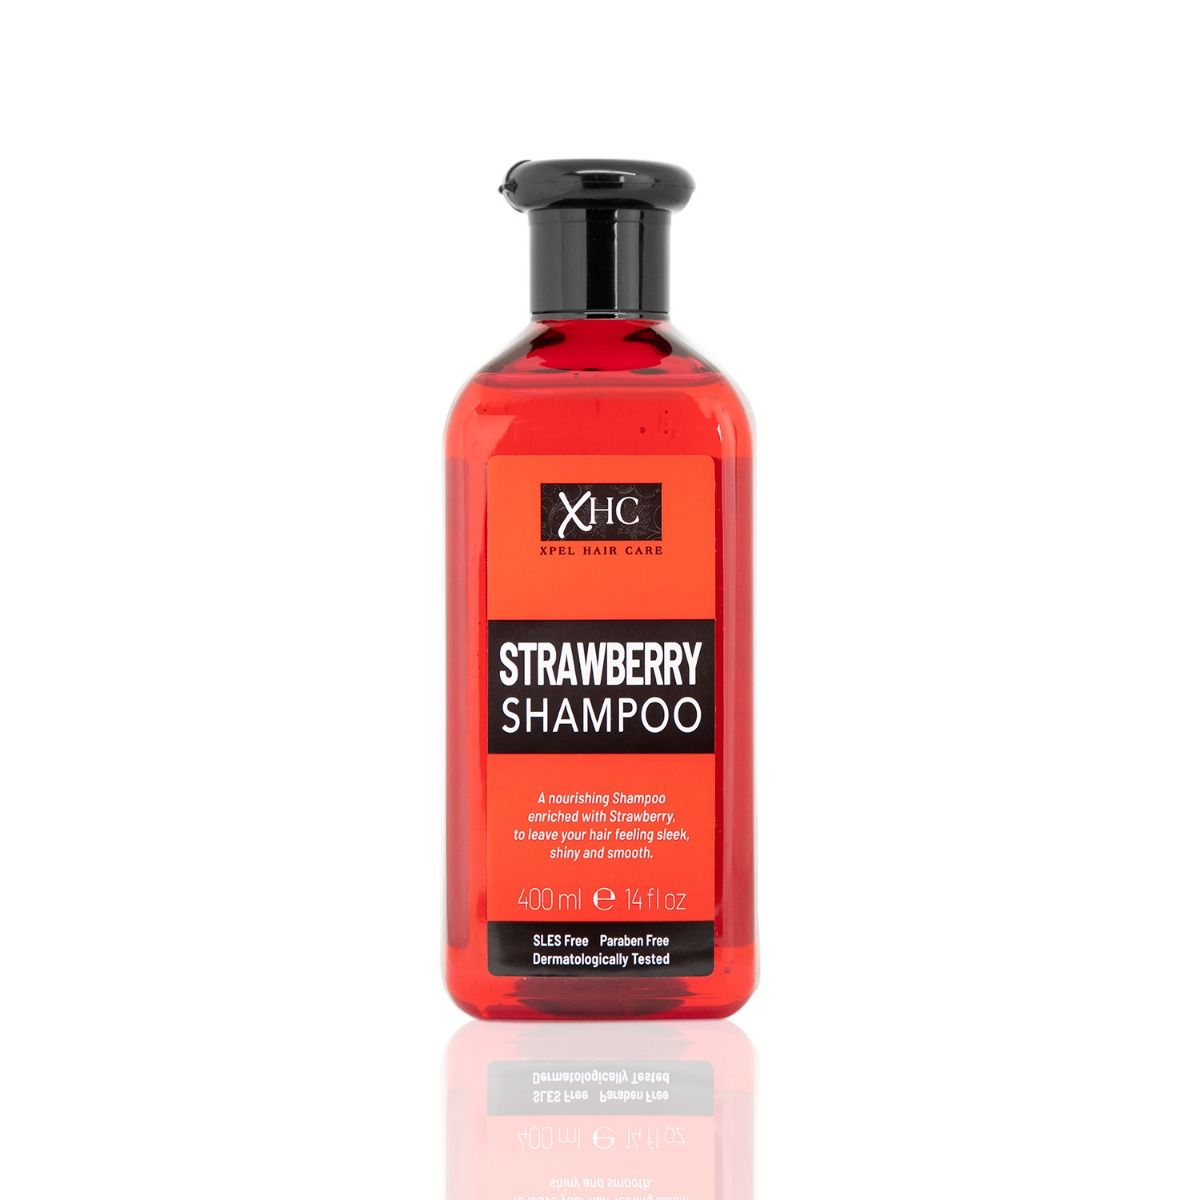 A Nourishing Shampoo Enriched with Strawberry to Leave Your Hair Feeling Sleek, Shiny and Smooth. - BCURVED